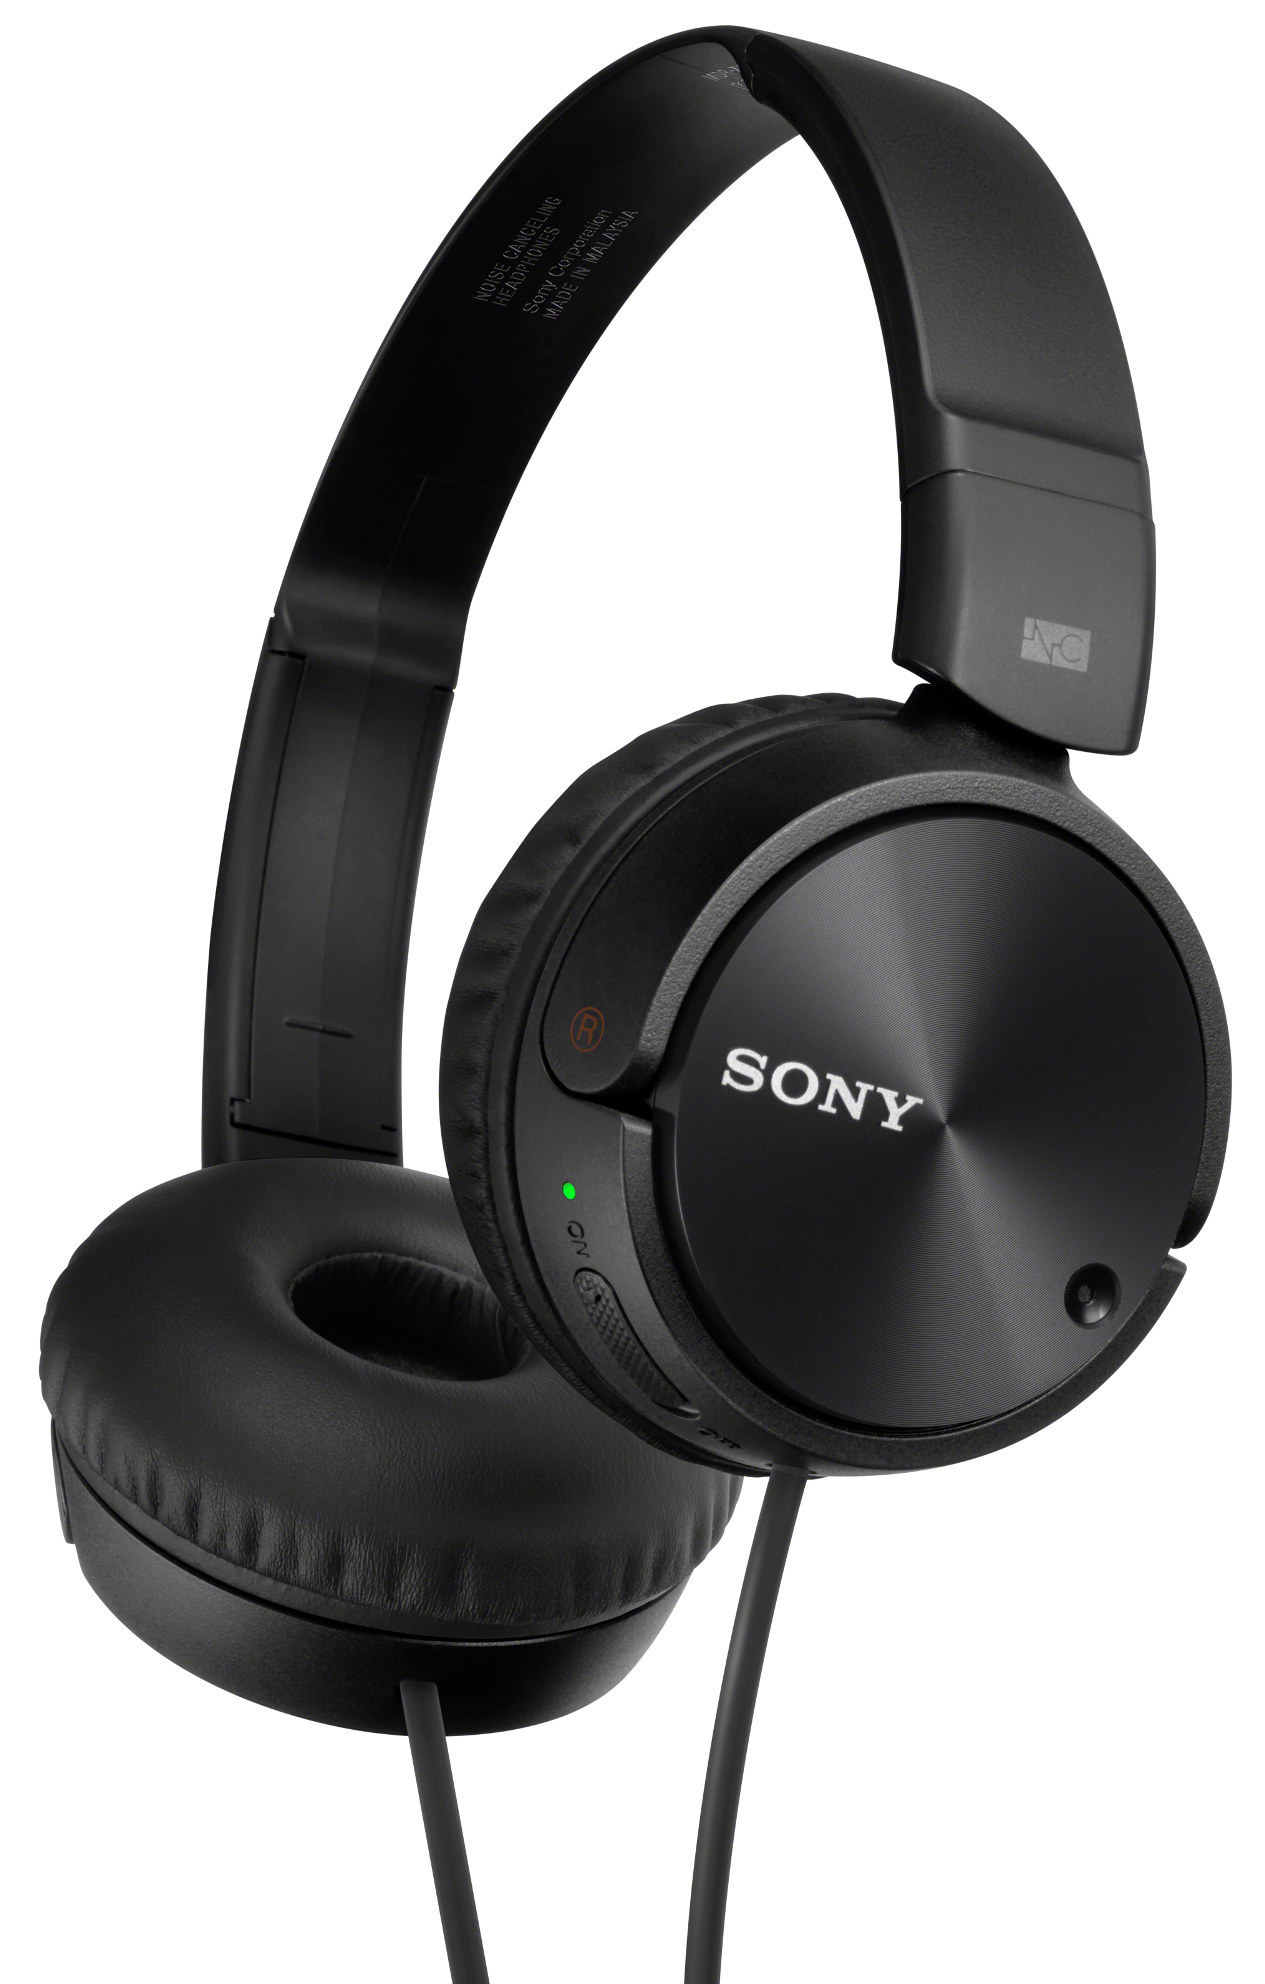 Sony Bluetooth Noise-Canceling Over-Ear Headphones, Black, MDRZX110NC - image 2 of 10